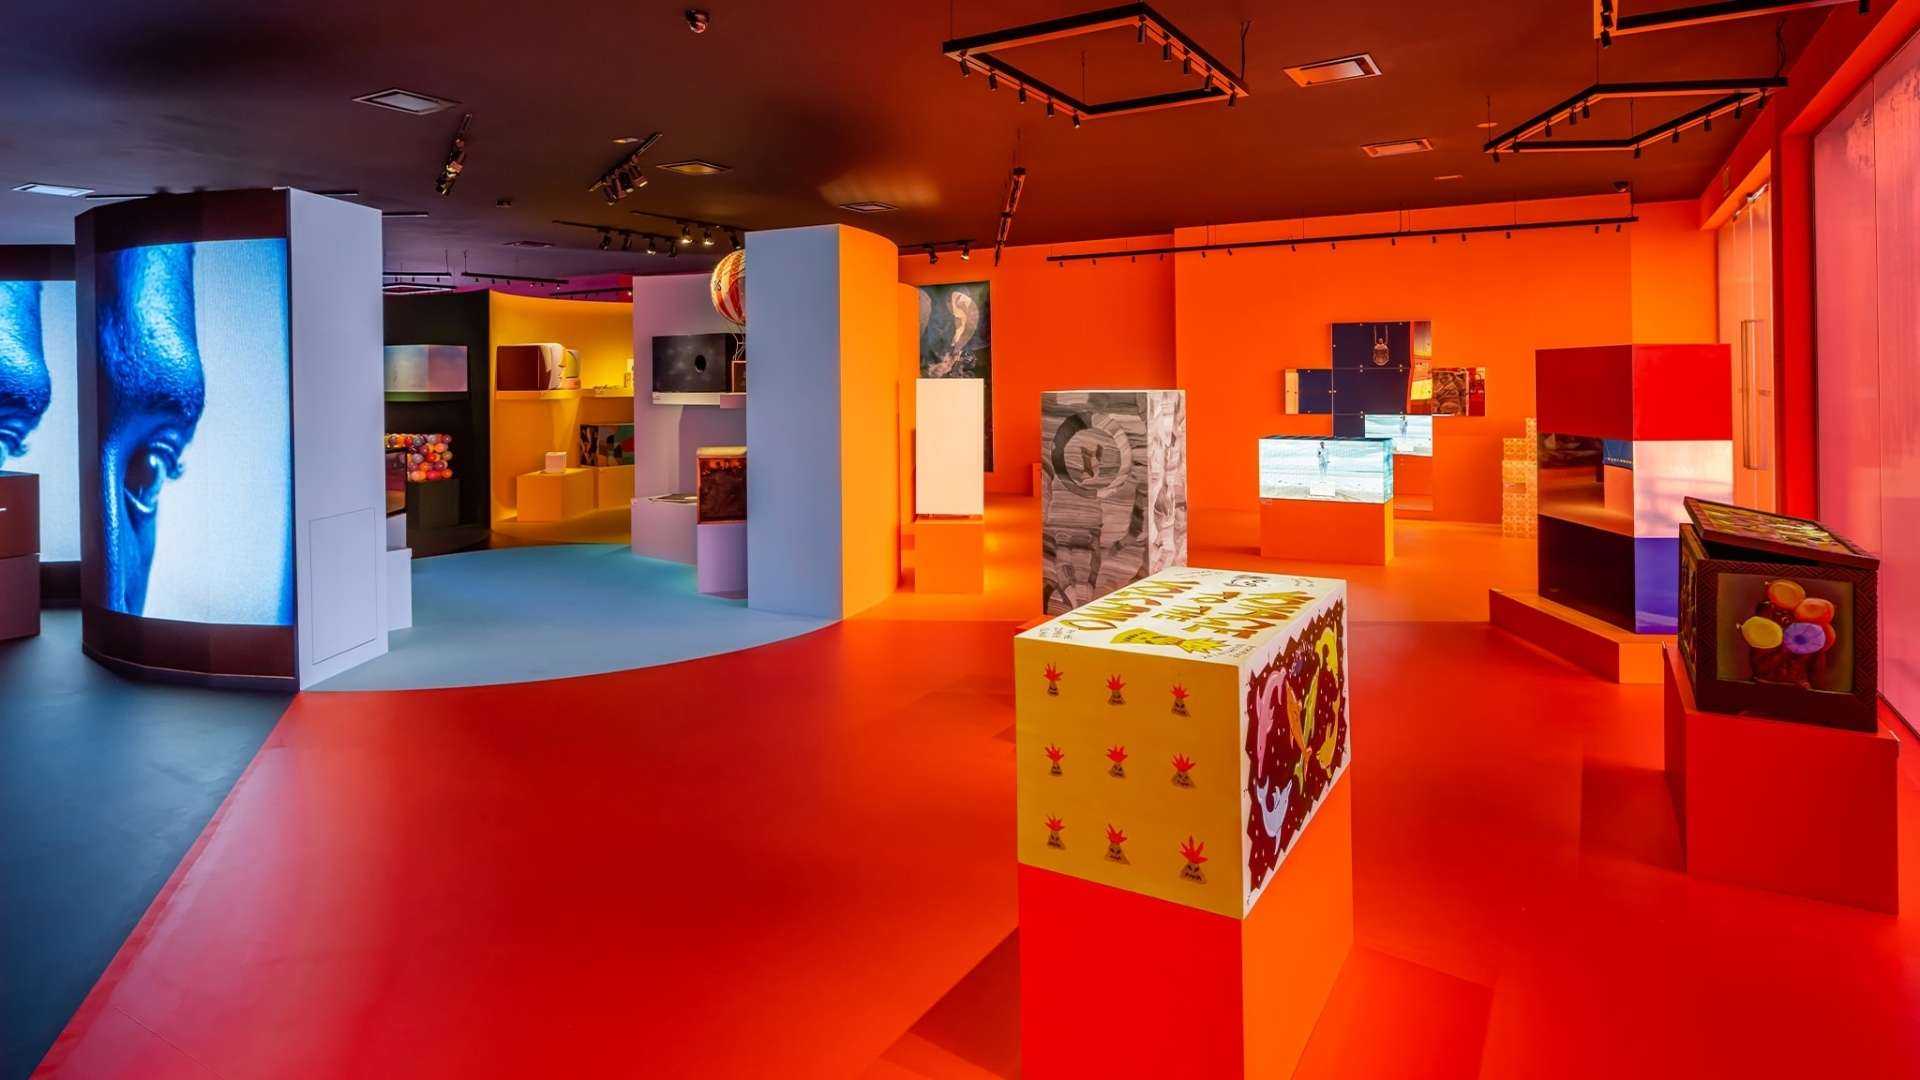 200 TRUNKS, 200 VISIONARIES: THE EXHIBITION” in Singapore